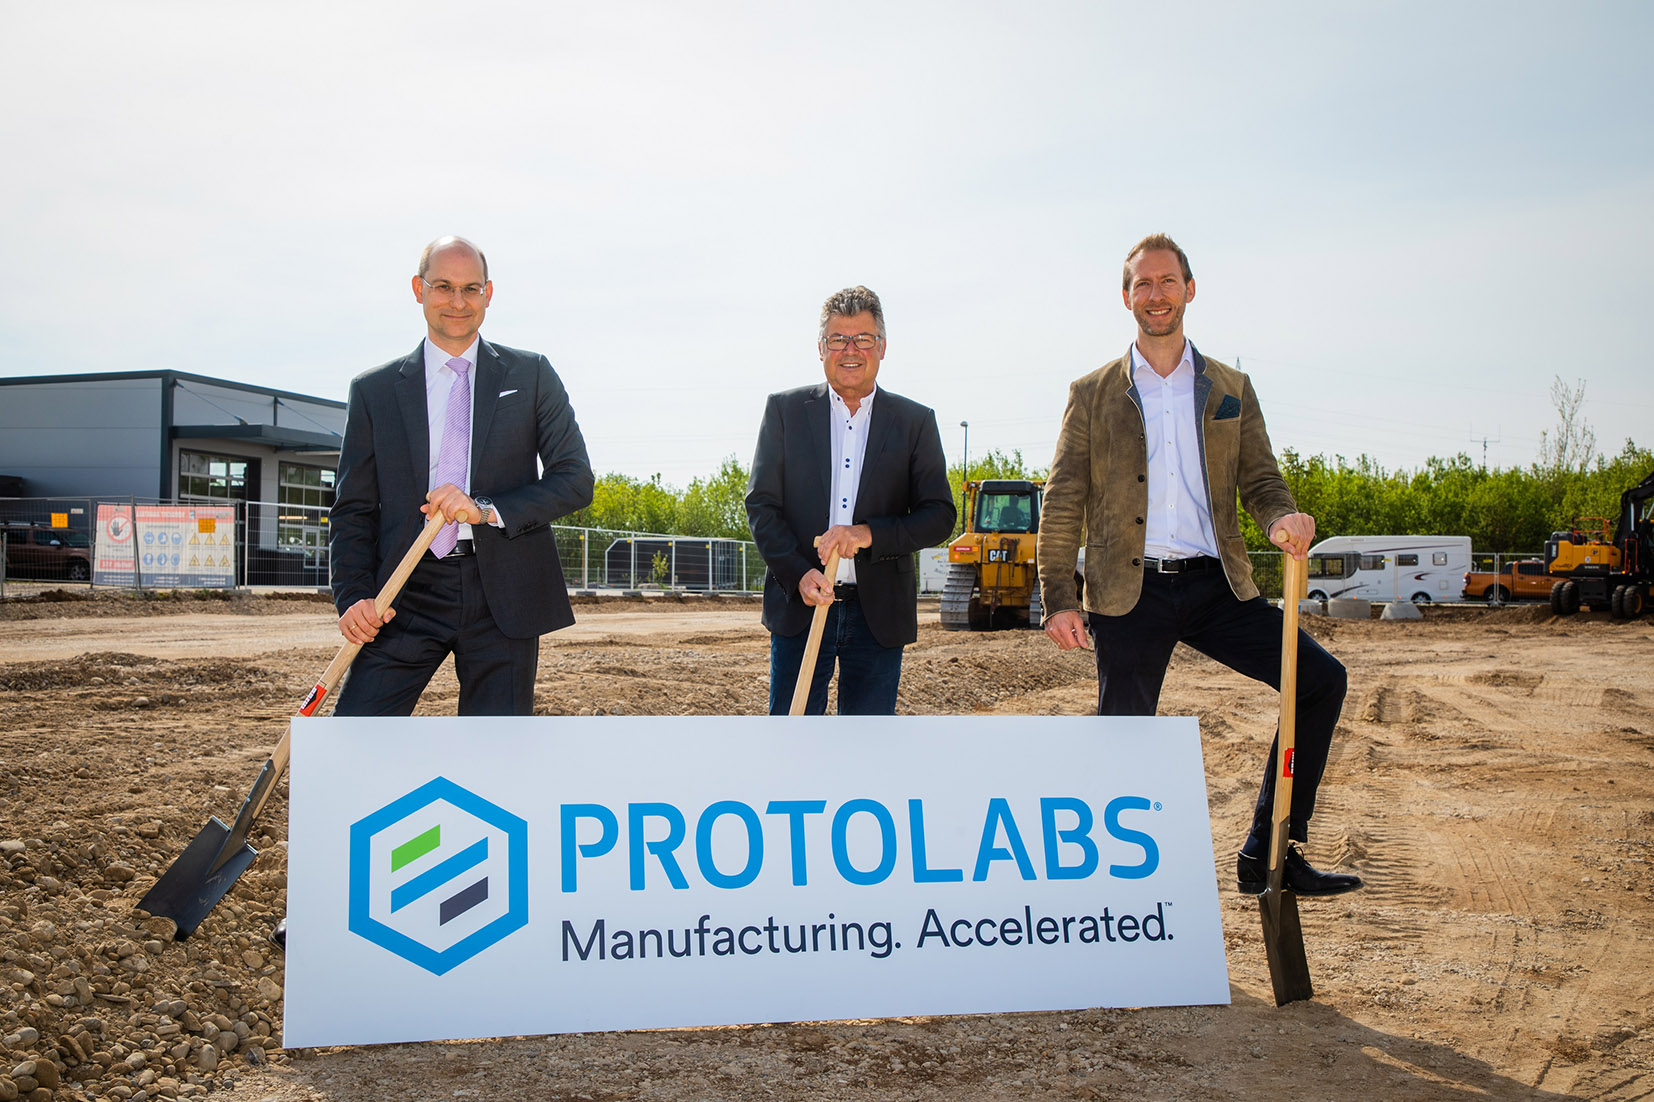 Featured image shows construction getting underway at Protolabs' new site (From left) Michael Meier (Protolabs), Edwin Klostermeier (Mayor of Putzbrunn) and Daniel Cohn (Protolabs). Photo via Protolabs.